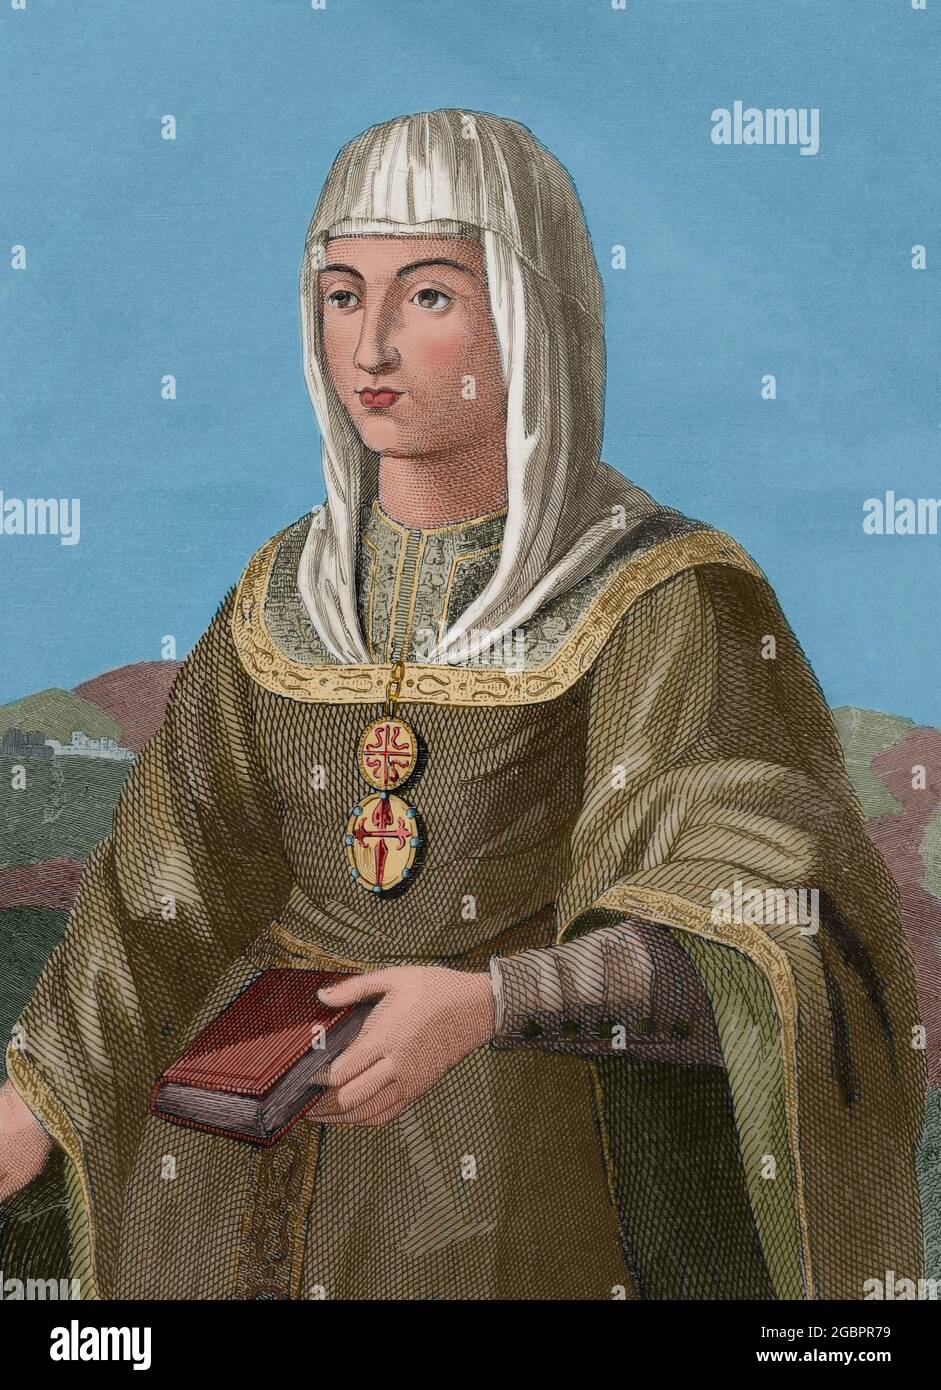 Joanna of Castile (known as Joanna the Mad) (1479-1555). Queen of Castile (1504-1555) and Aragon (from 1516), daughter of the Catholic Monarchs. Wife of Philip the Handsome. Portrait. Engraving by Antonio Roca Sallent. Las Glorias Nacionales, 1853. Later colouration. Stock Photo